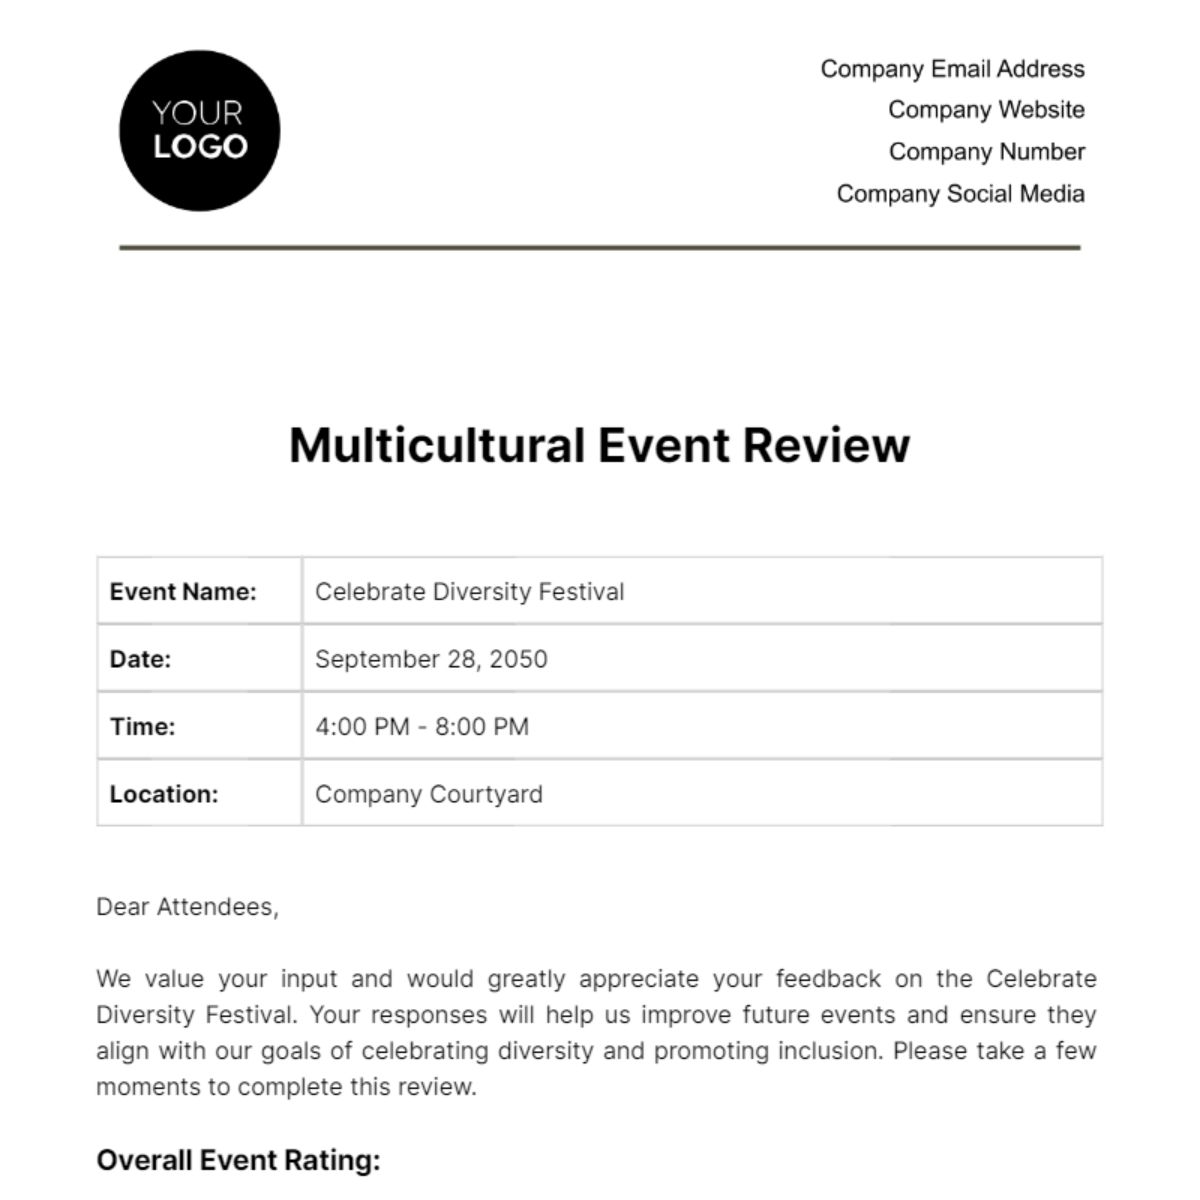 Free Multicultural Event Review HR Template